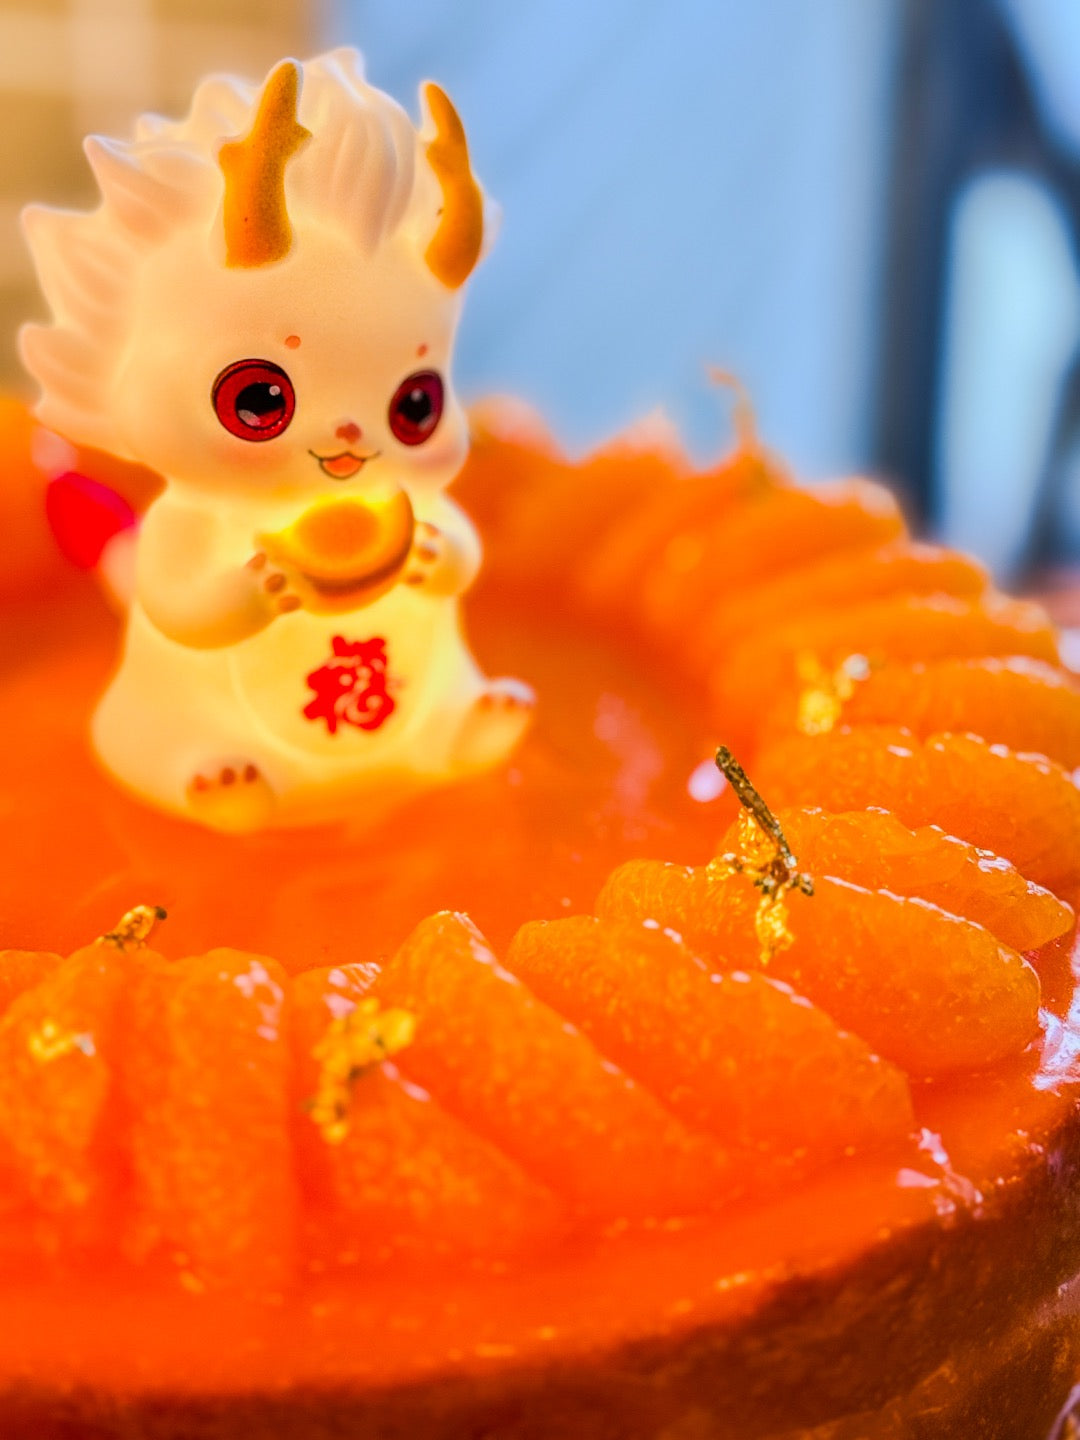 Every cake comes adorned with edible gold leaf and a baby dragon cake topper that lights up